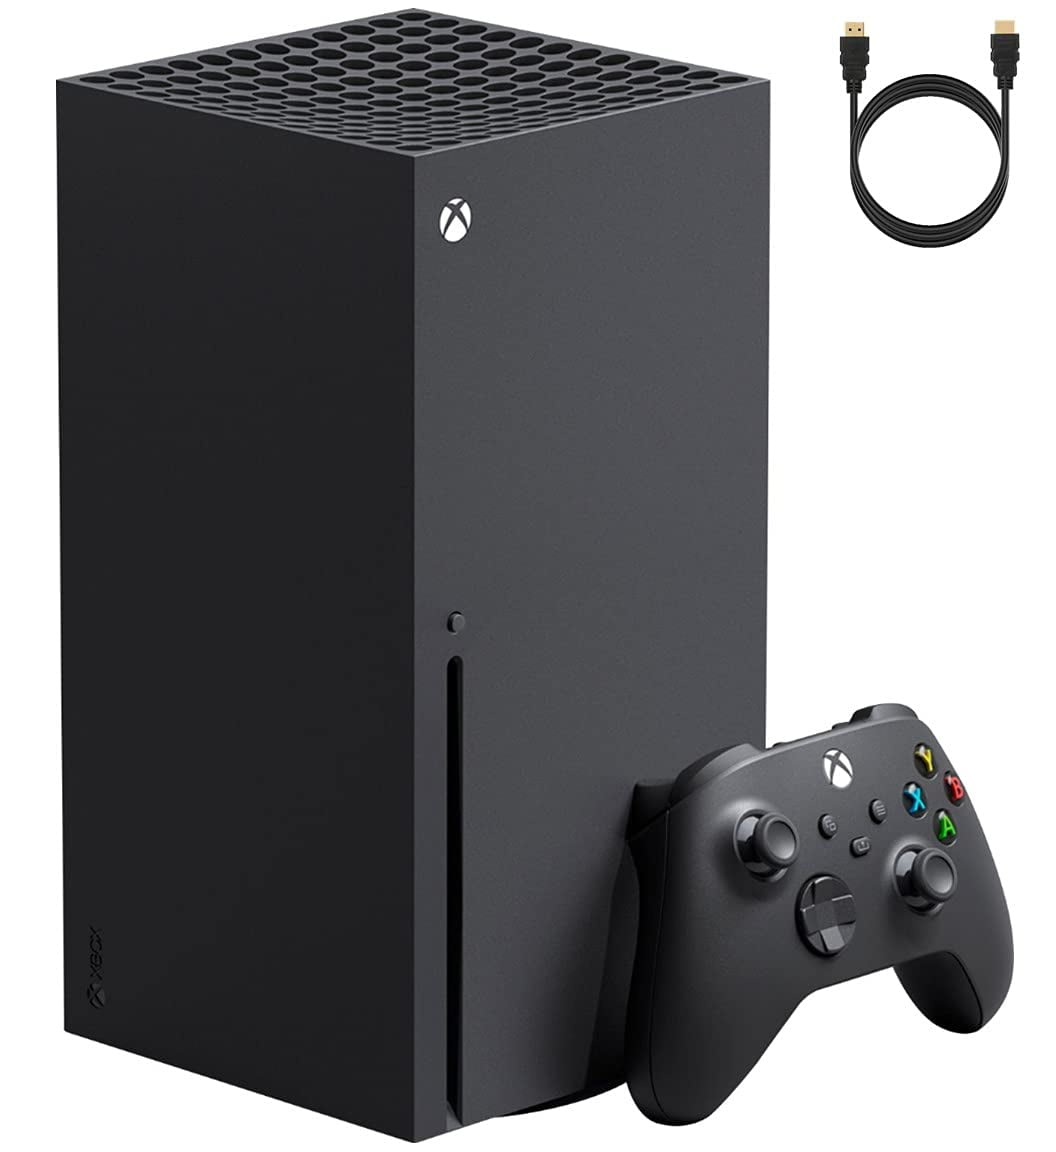 Microsoft Xbox Series X Gaming Bundle, Xbox Series X 1TB Console, Xbox Wireless Controller Carbon Black, 12 Teraflops processing power, up to 120FPS, 4K UHD Blu-ray Drive with Mazepoly Accessories